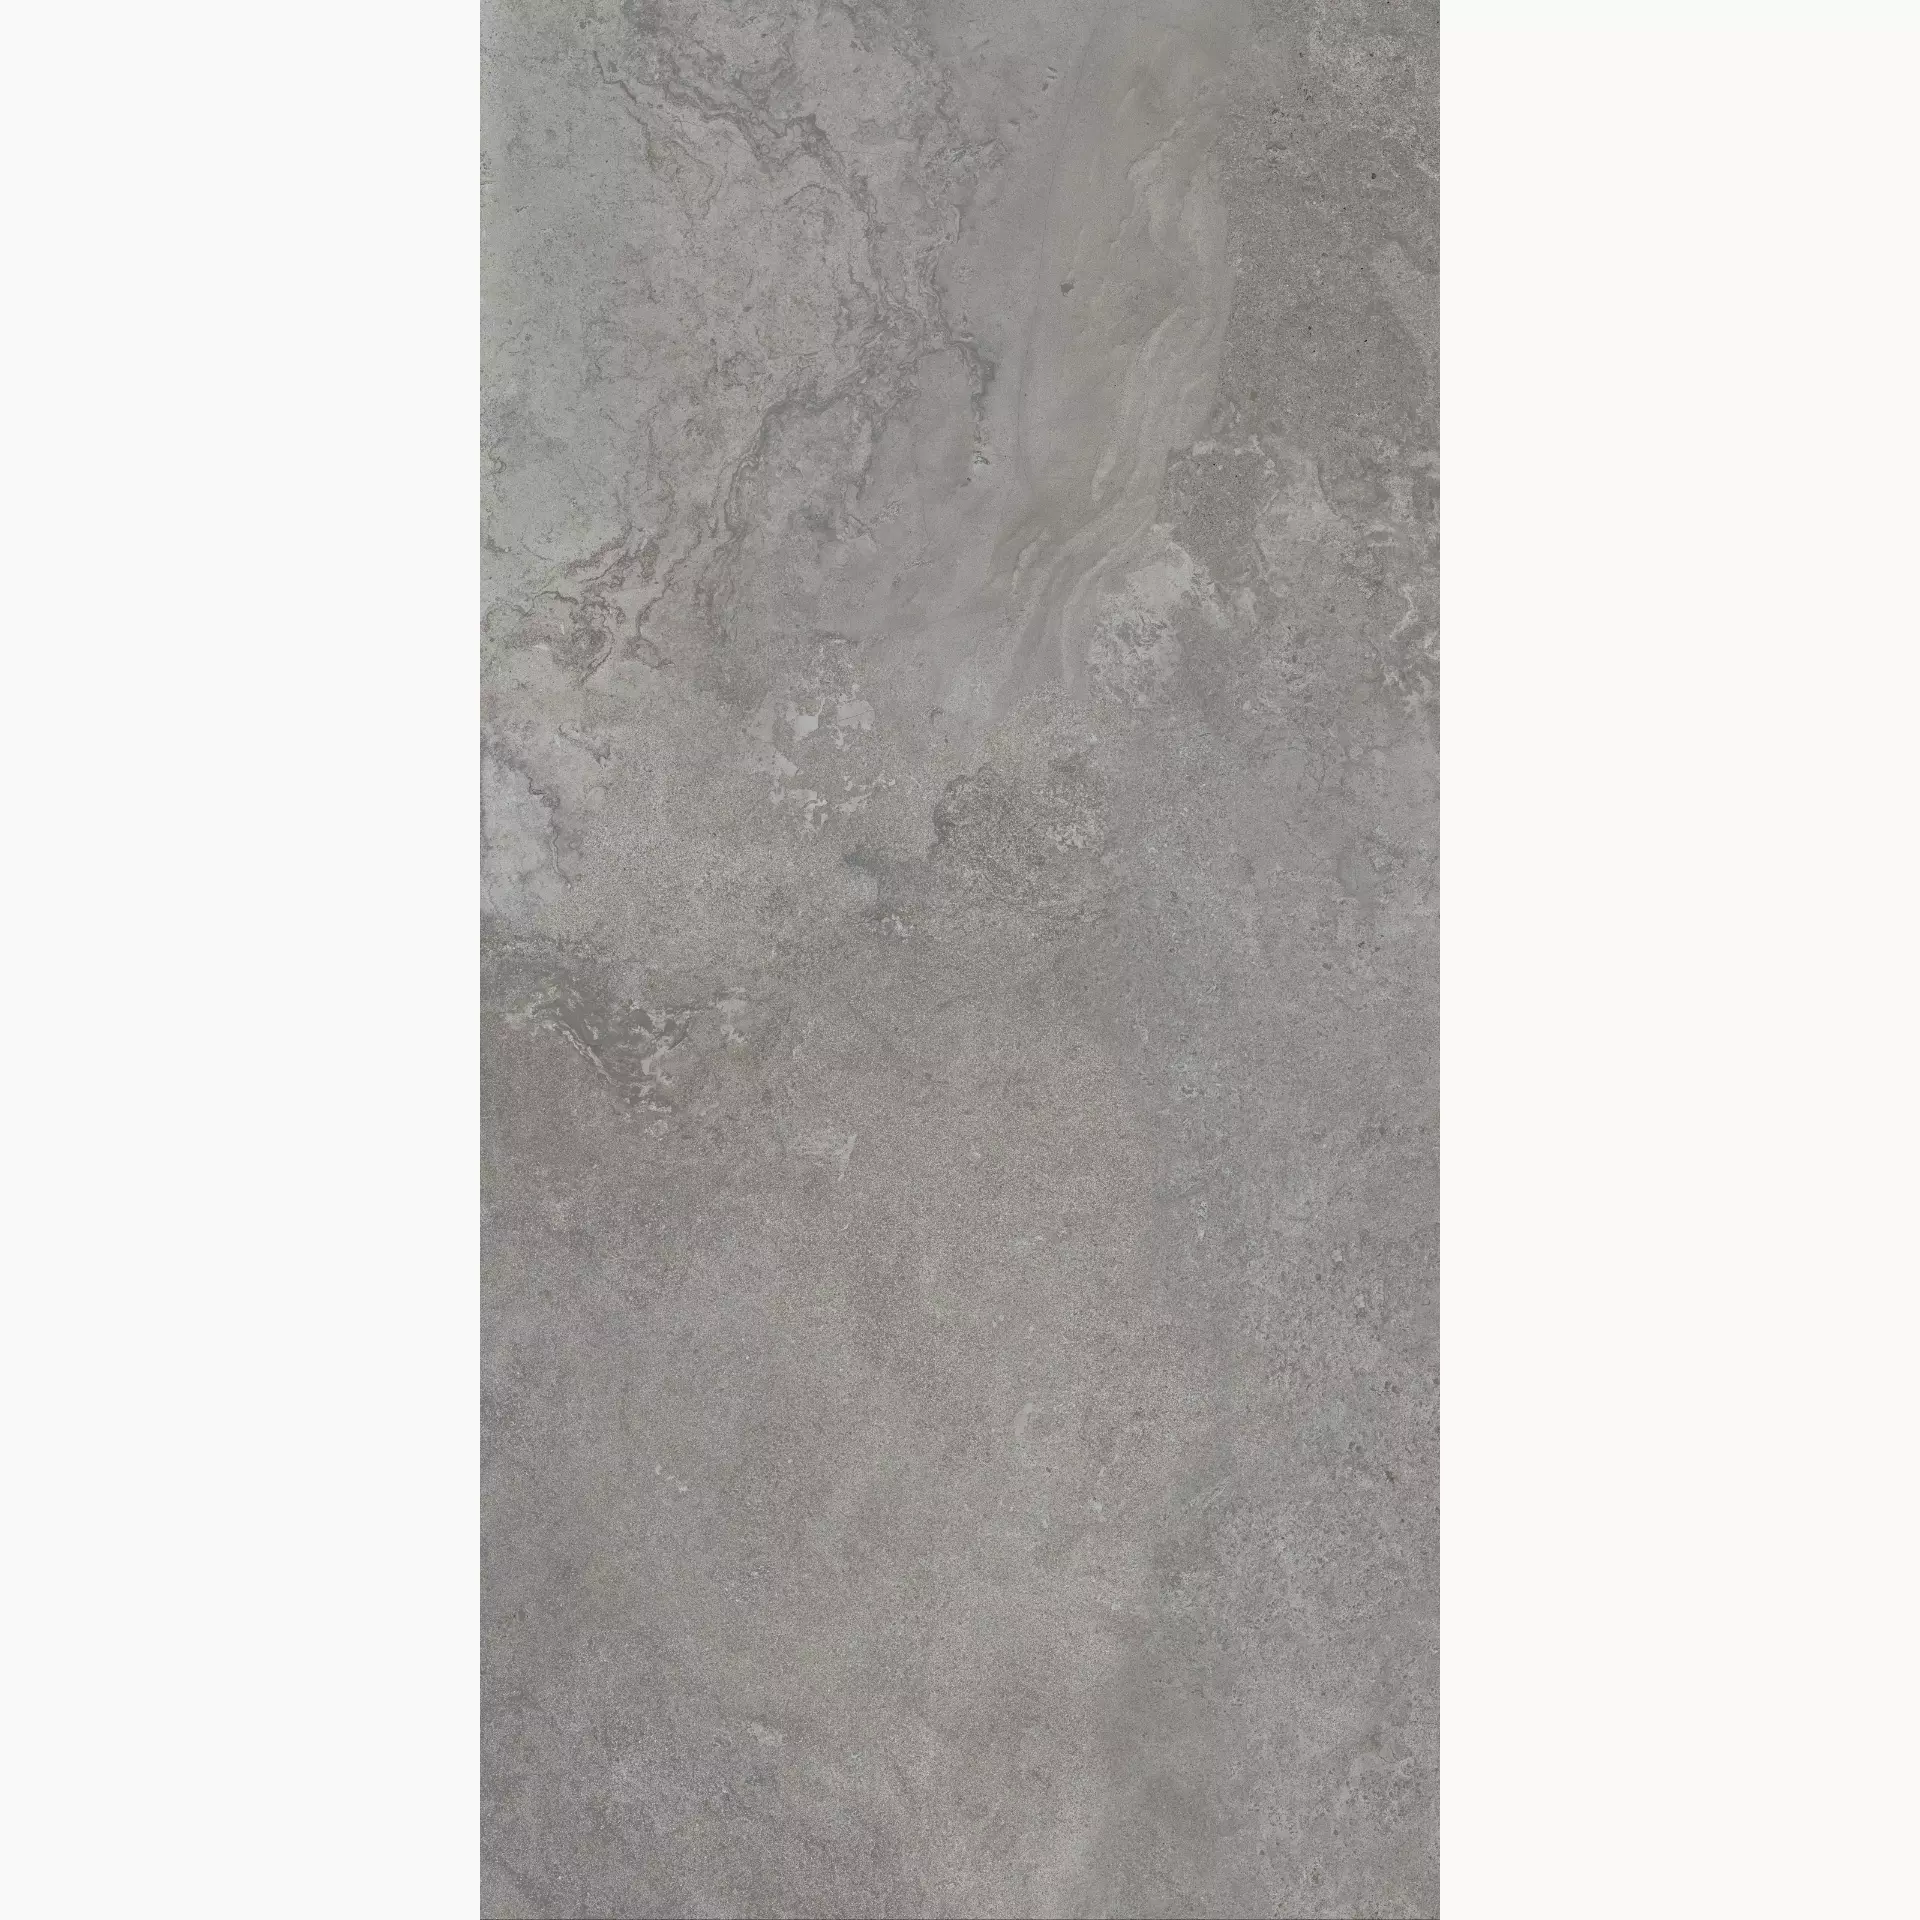 ABK Alpes Wide Lead Naturale PF60000205 80x160cm rectified 8,5mm